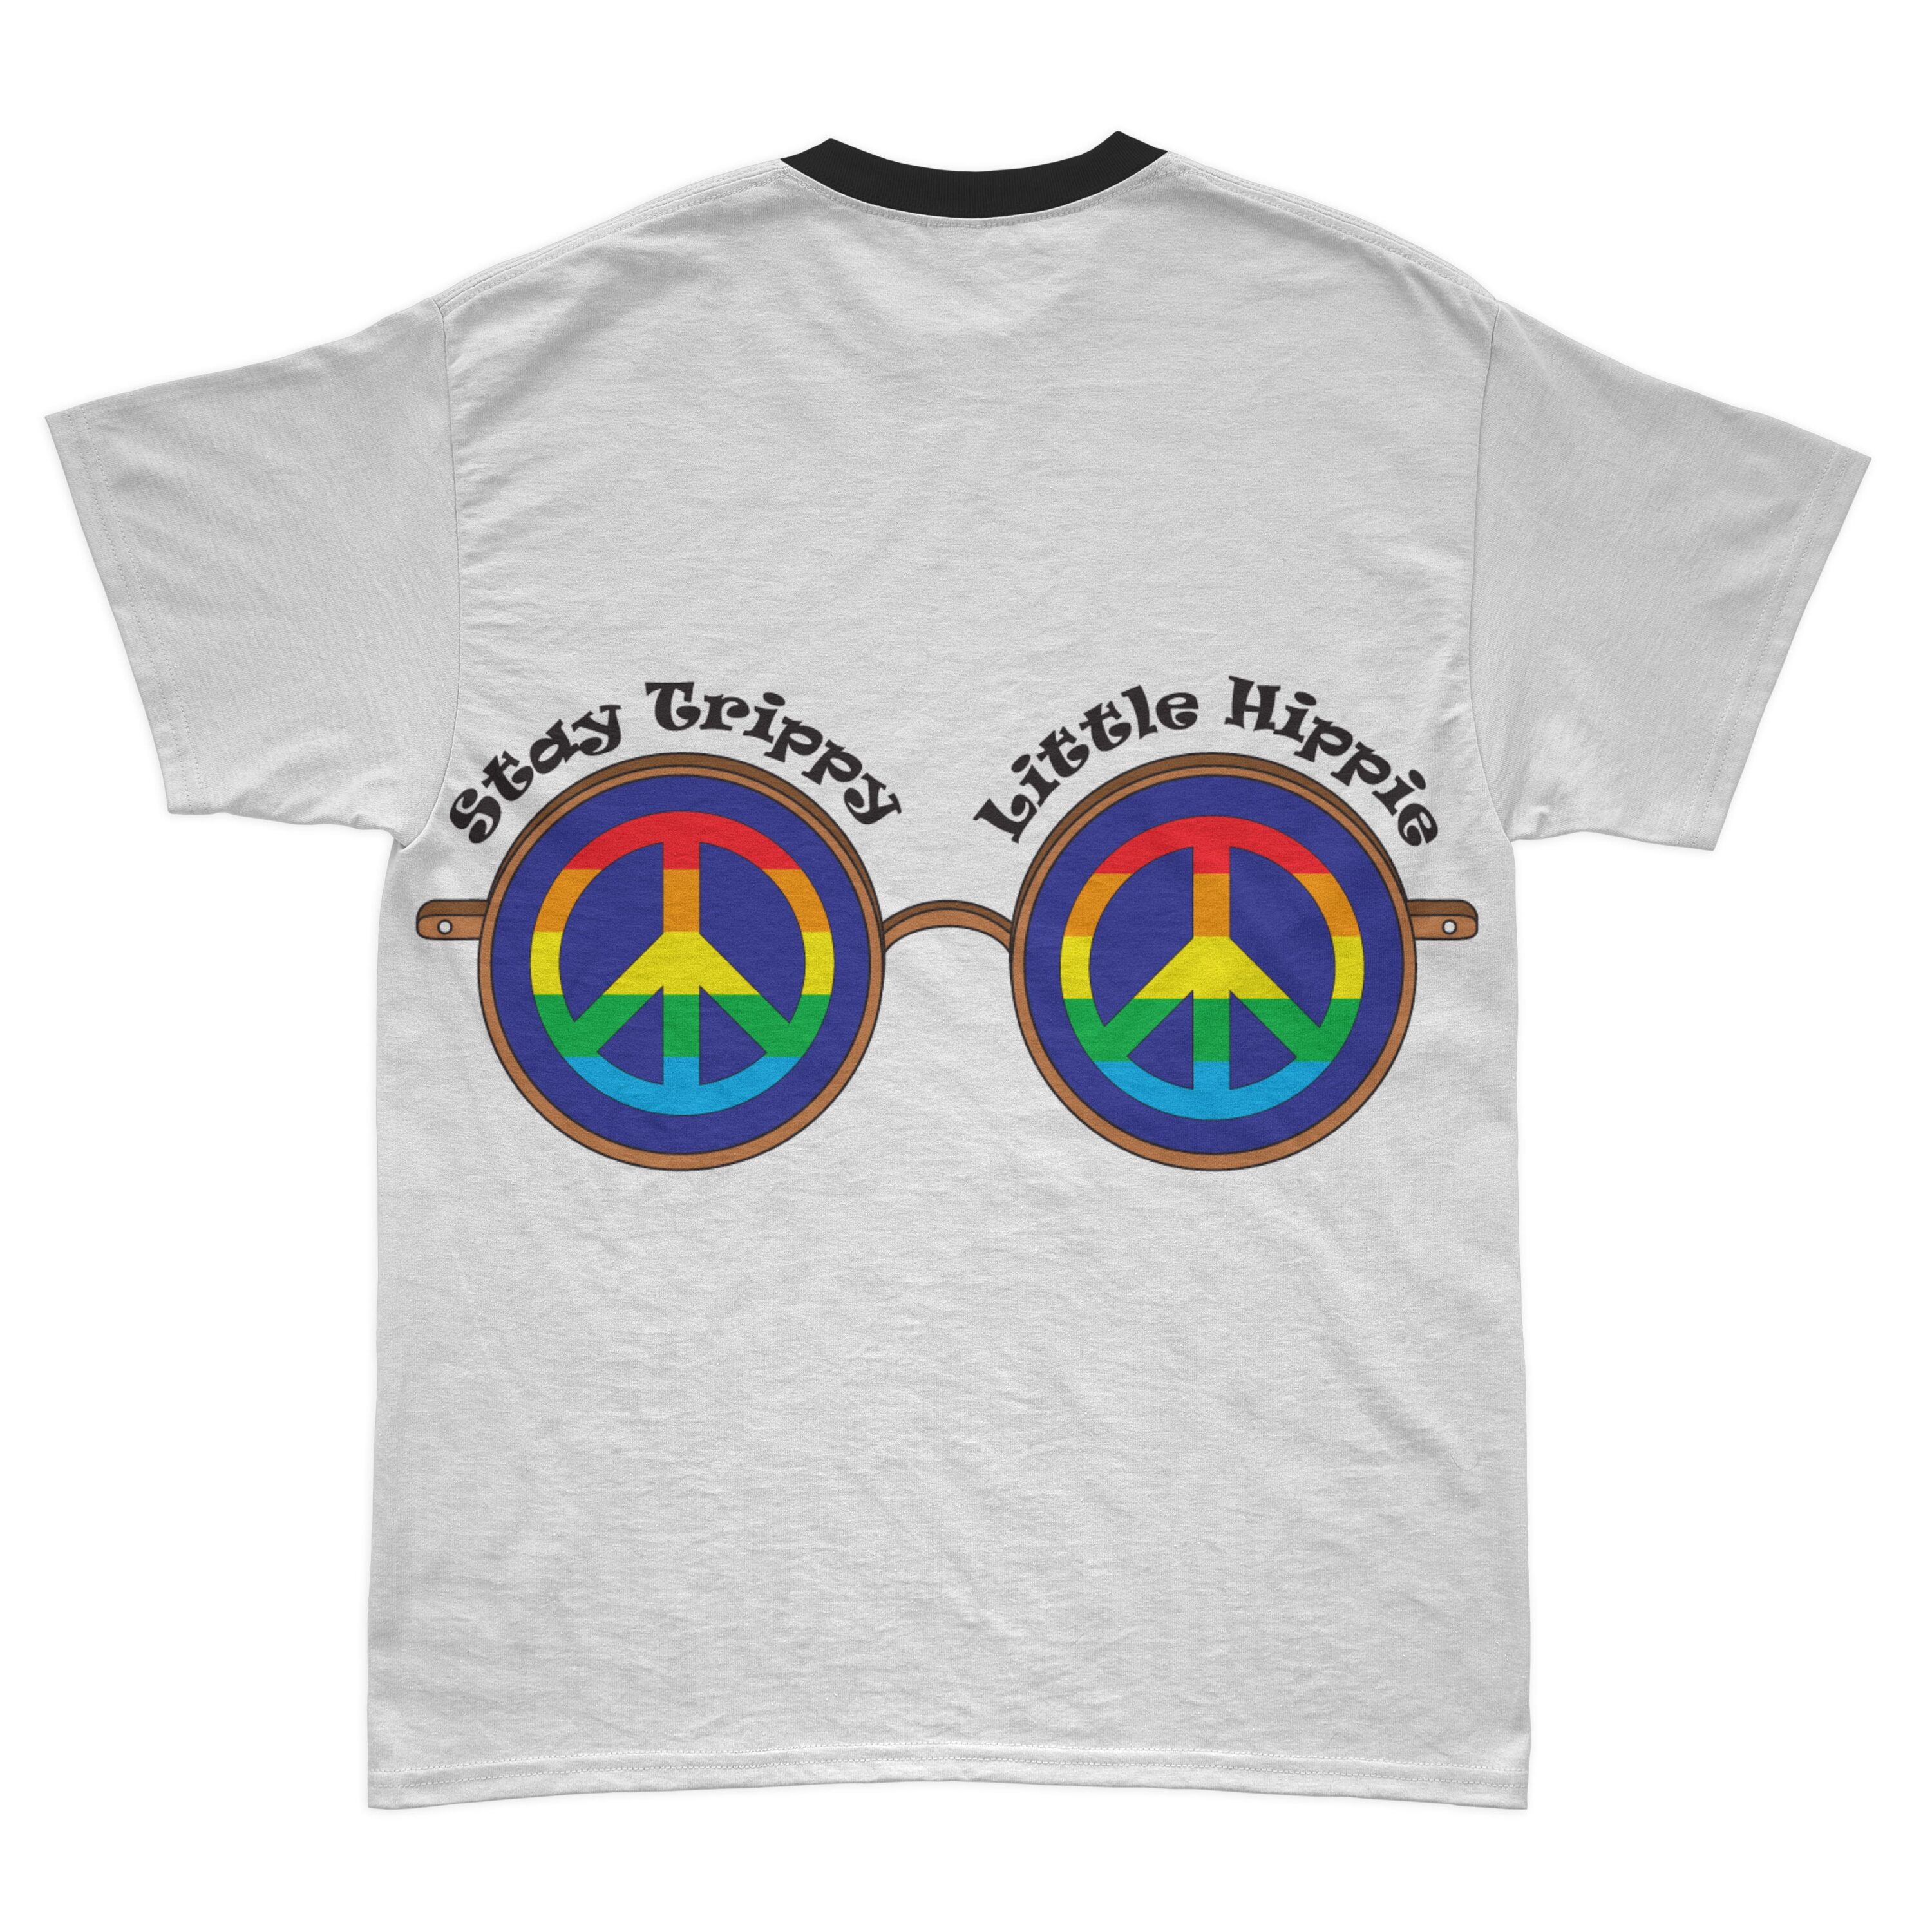 Sunglasses with rainbow hippie element printed on the t-shirt.